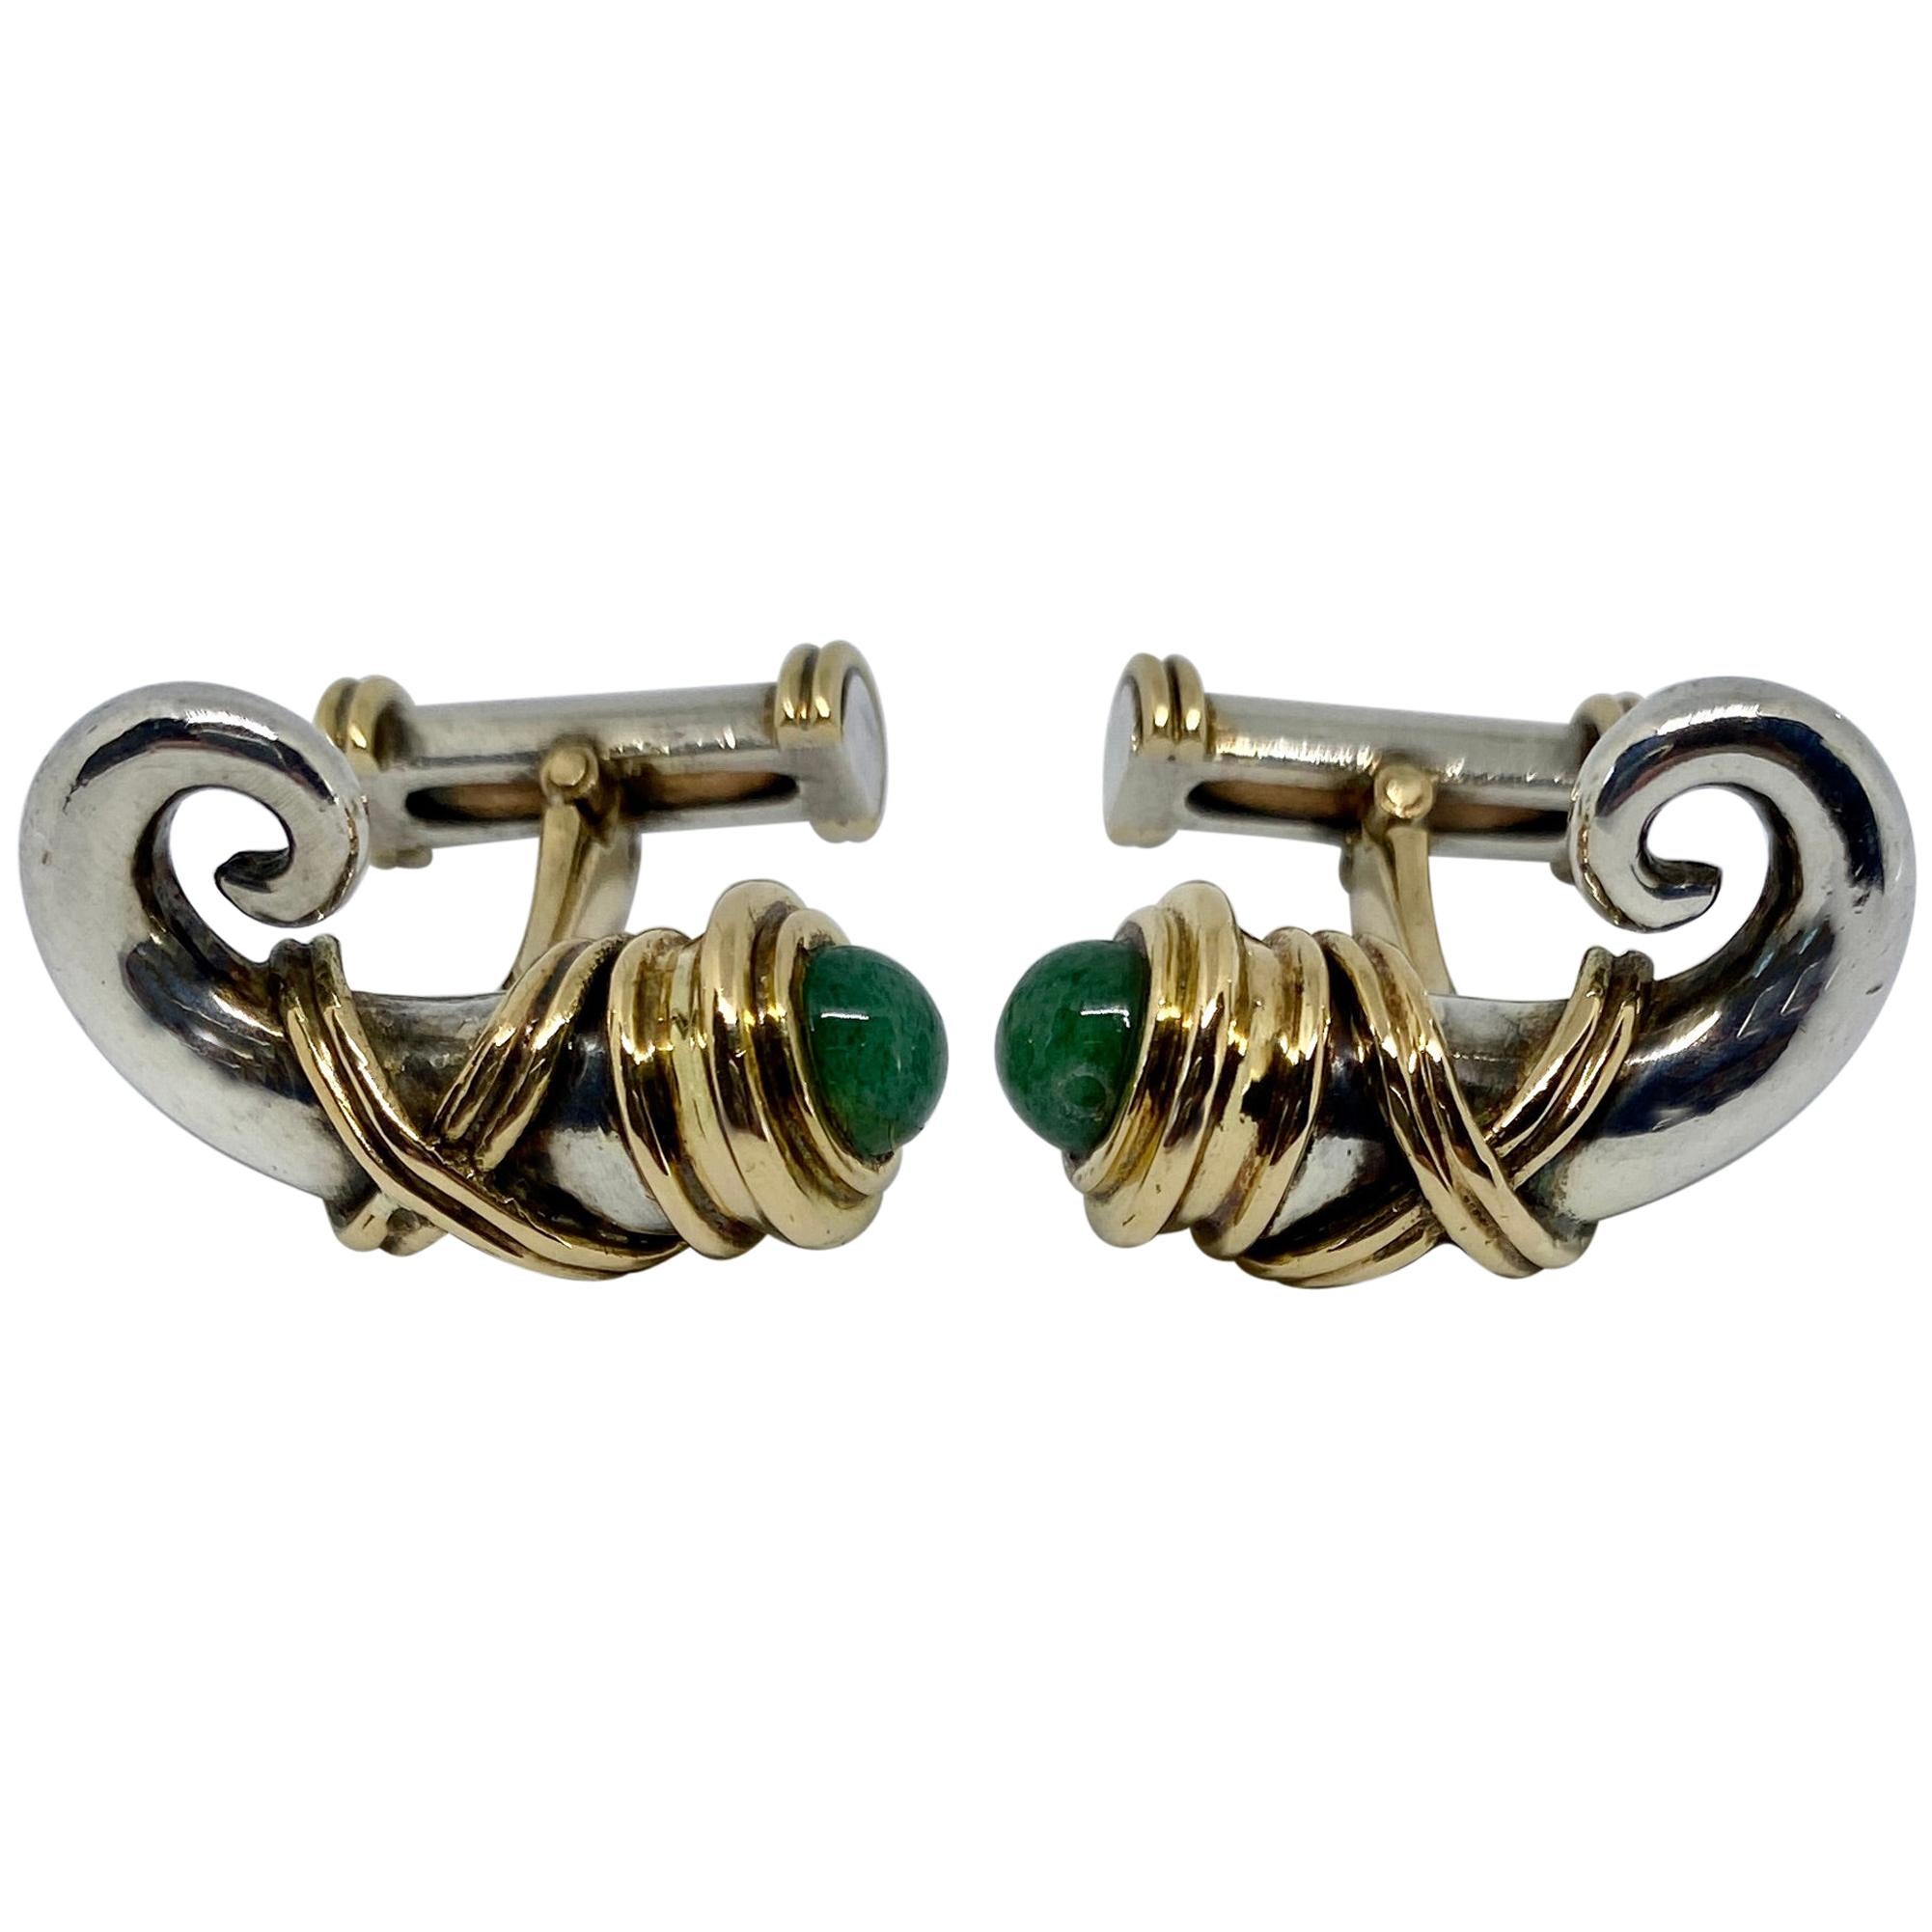 Zolotas "Ram" Cufflinks in 18 Karat Gold and Silver with Green Gemstones For Sale